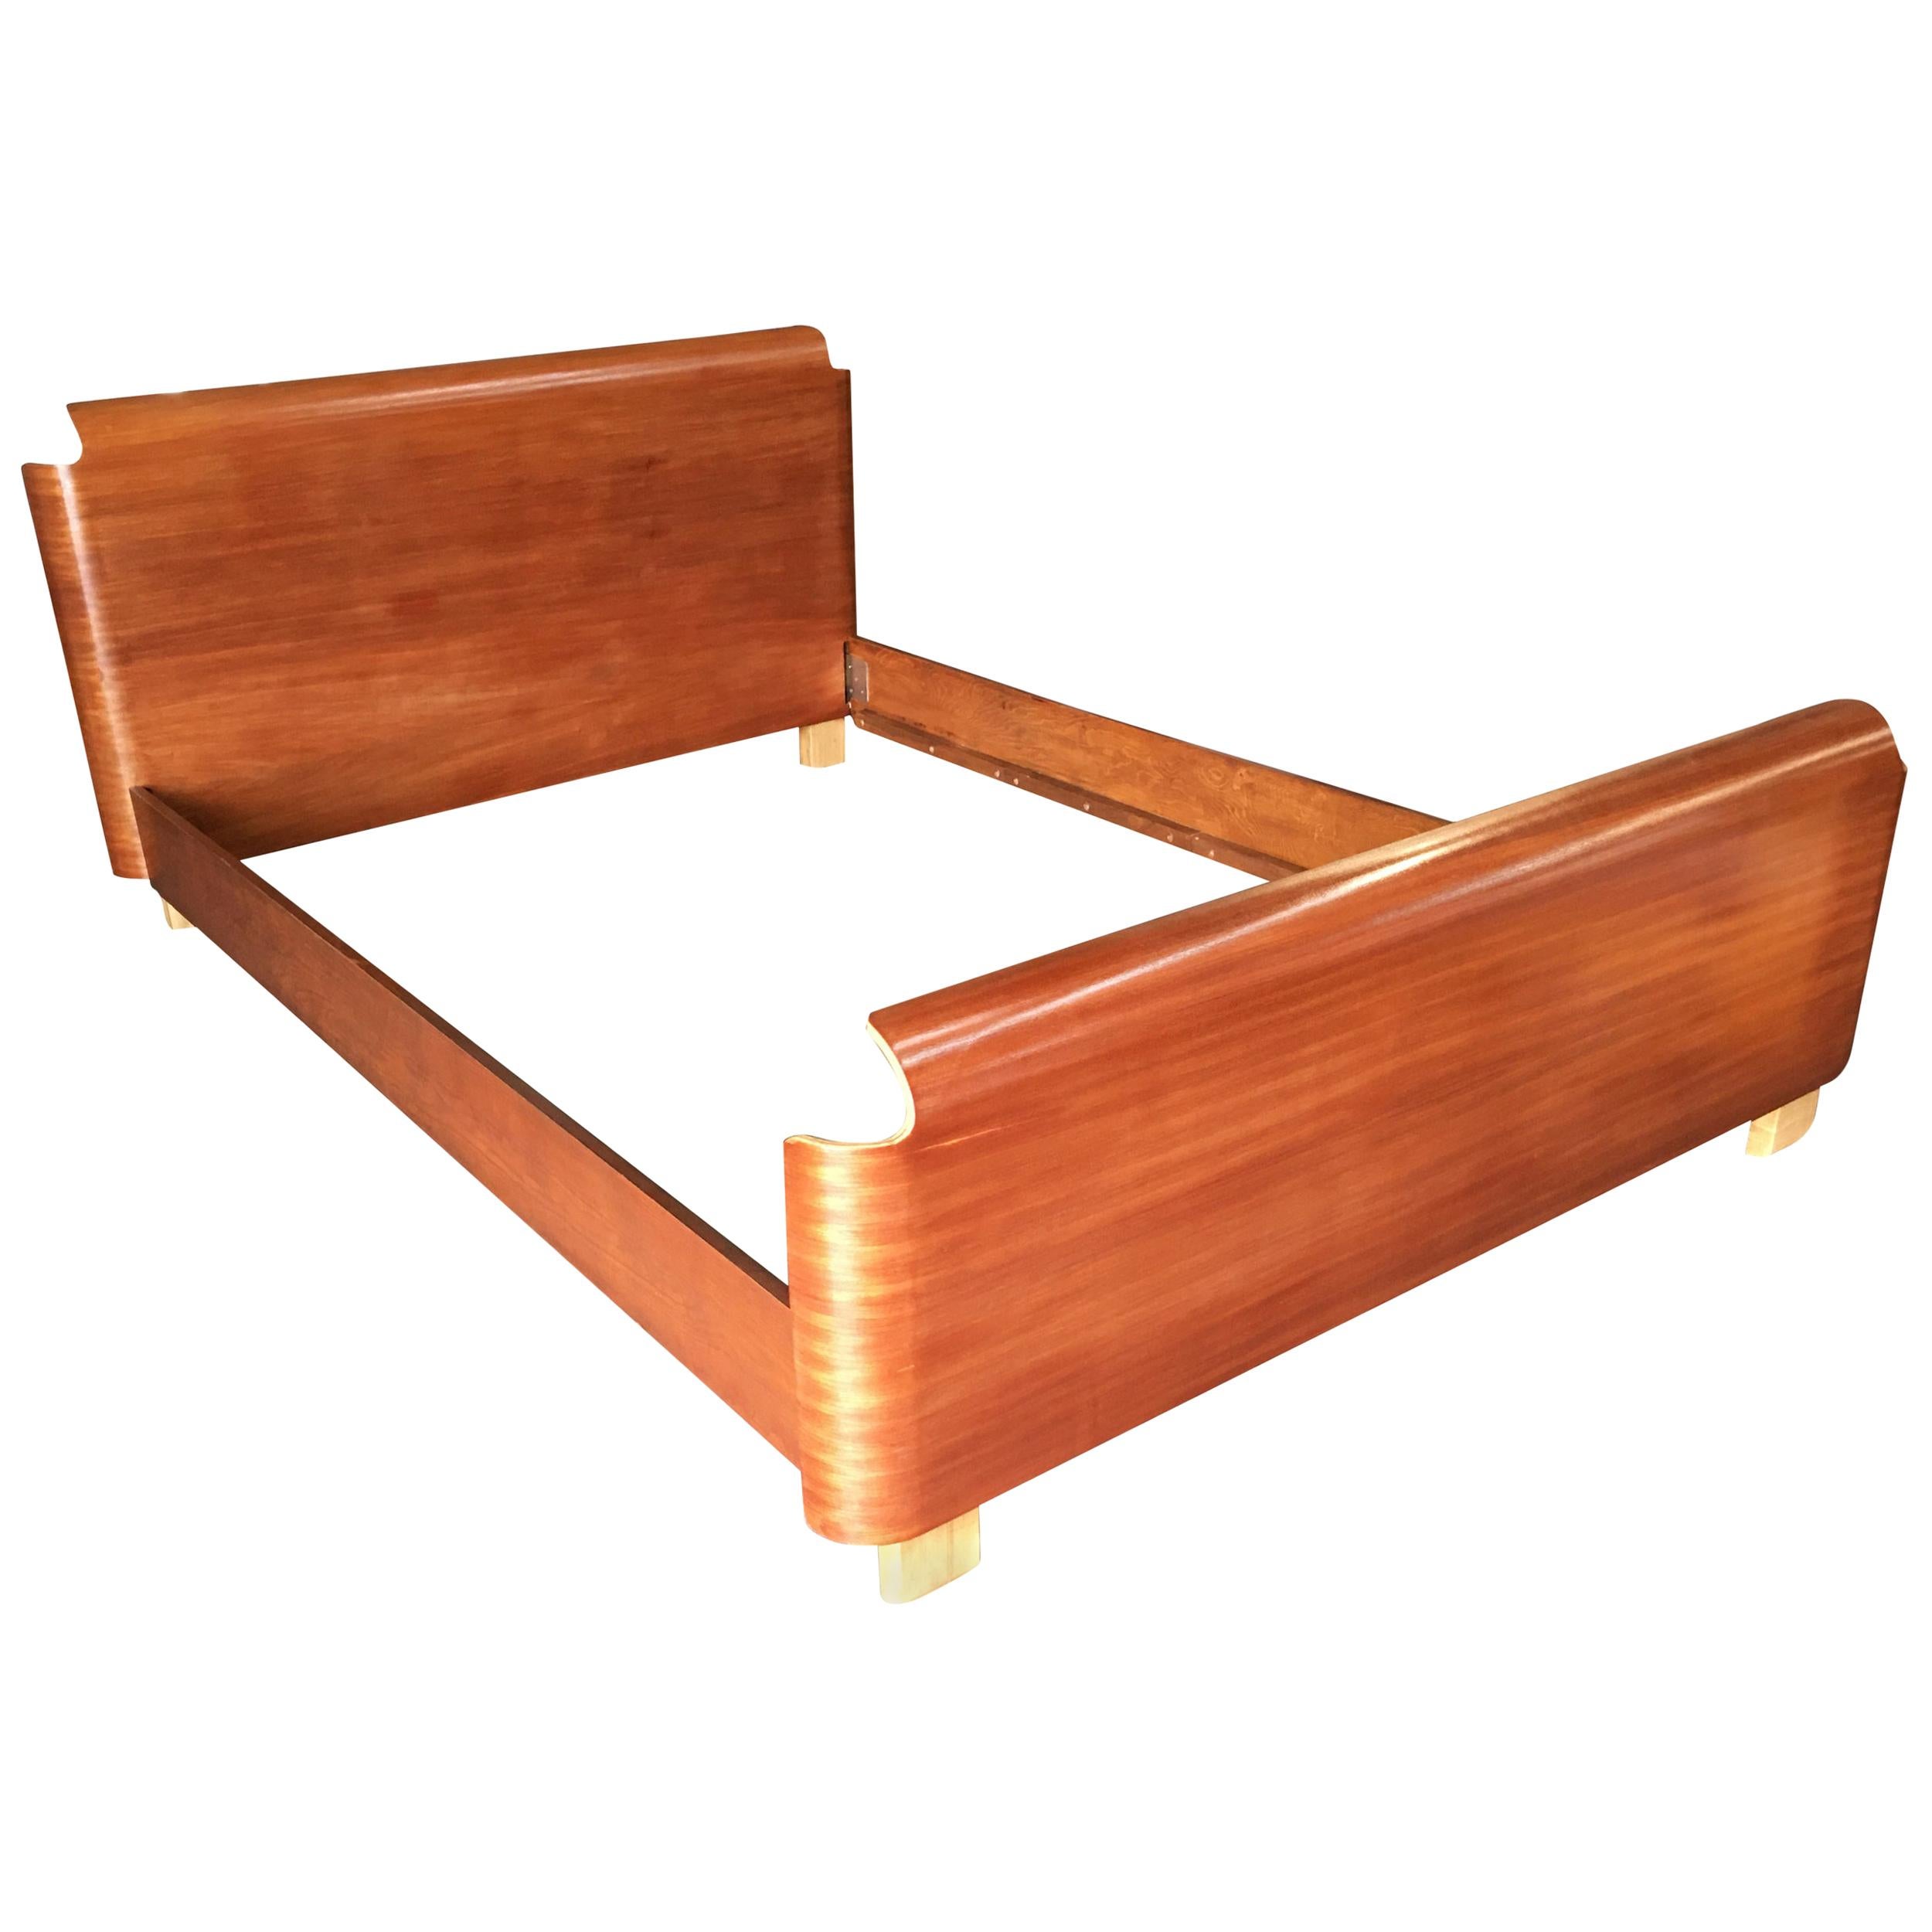 Midcentury Molded Plywood Bed Frame For, Plywood Bed Frame